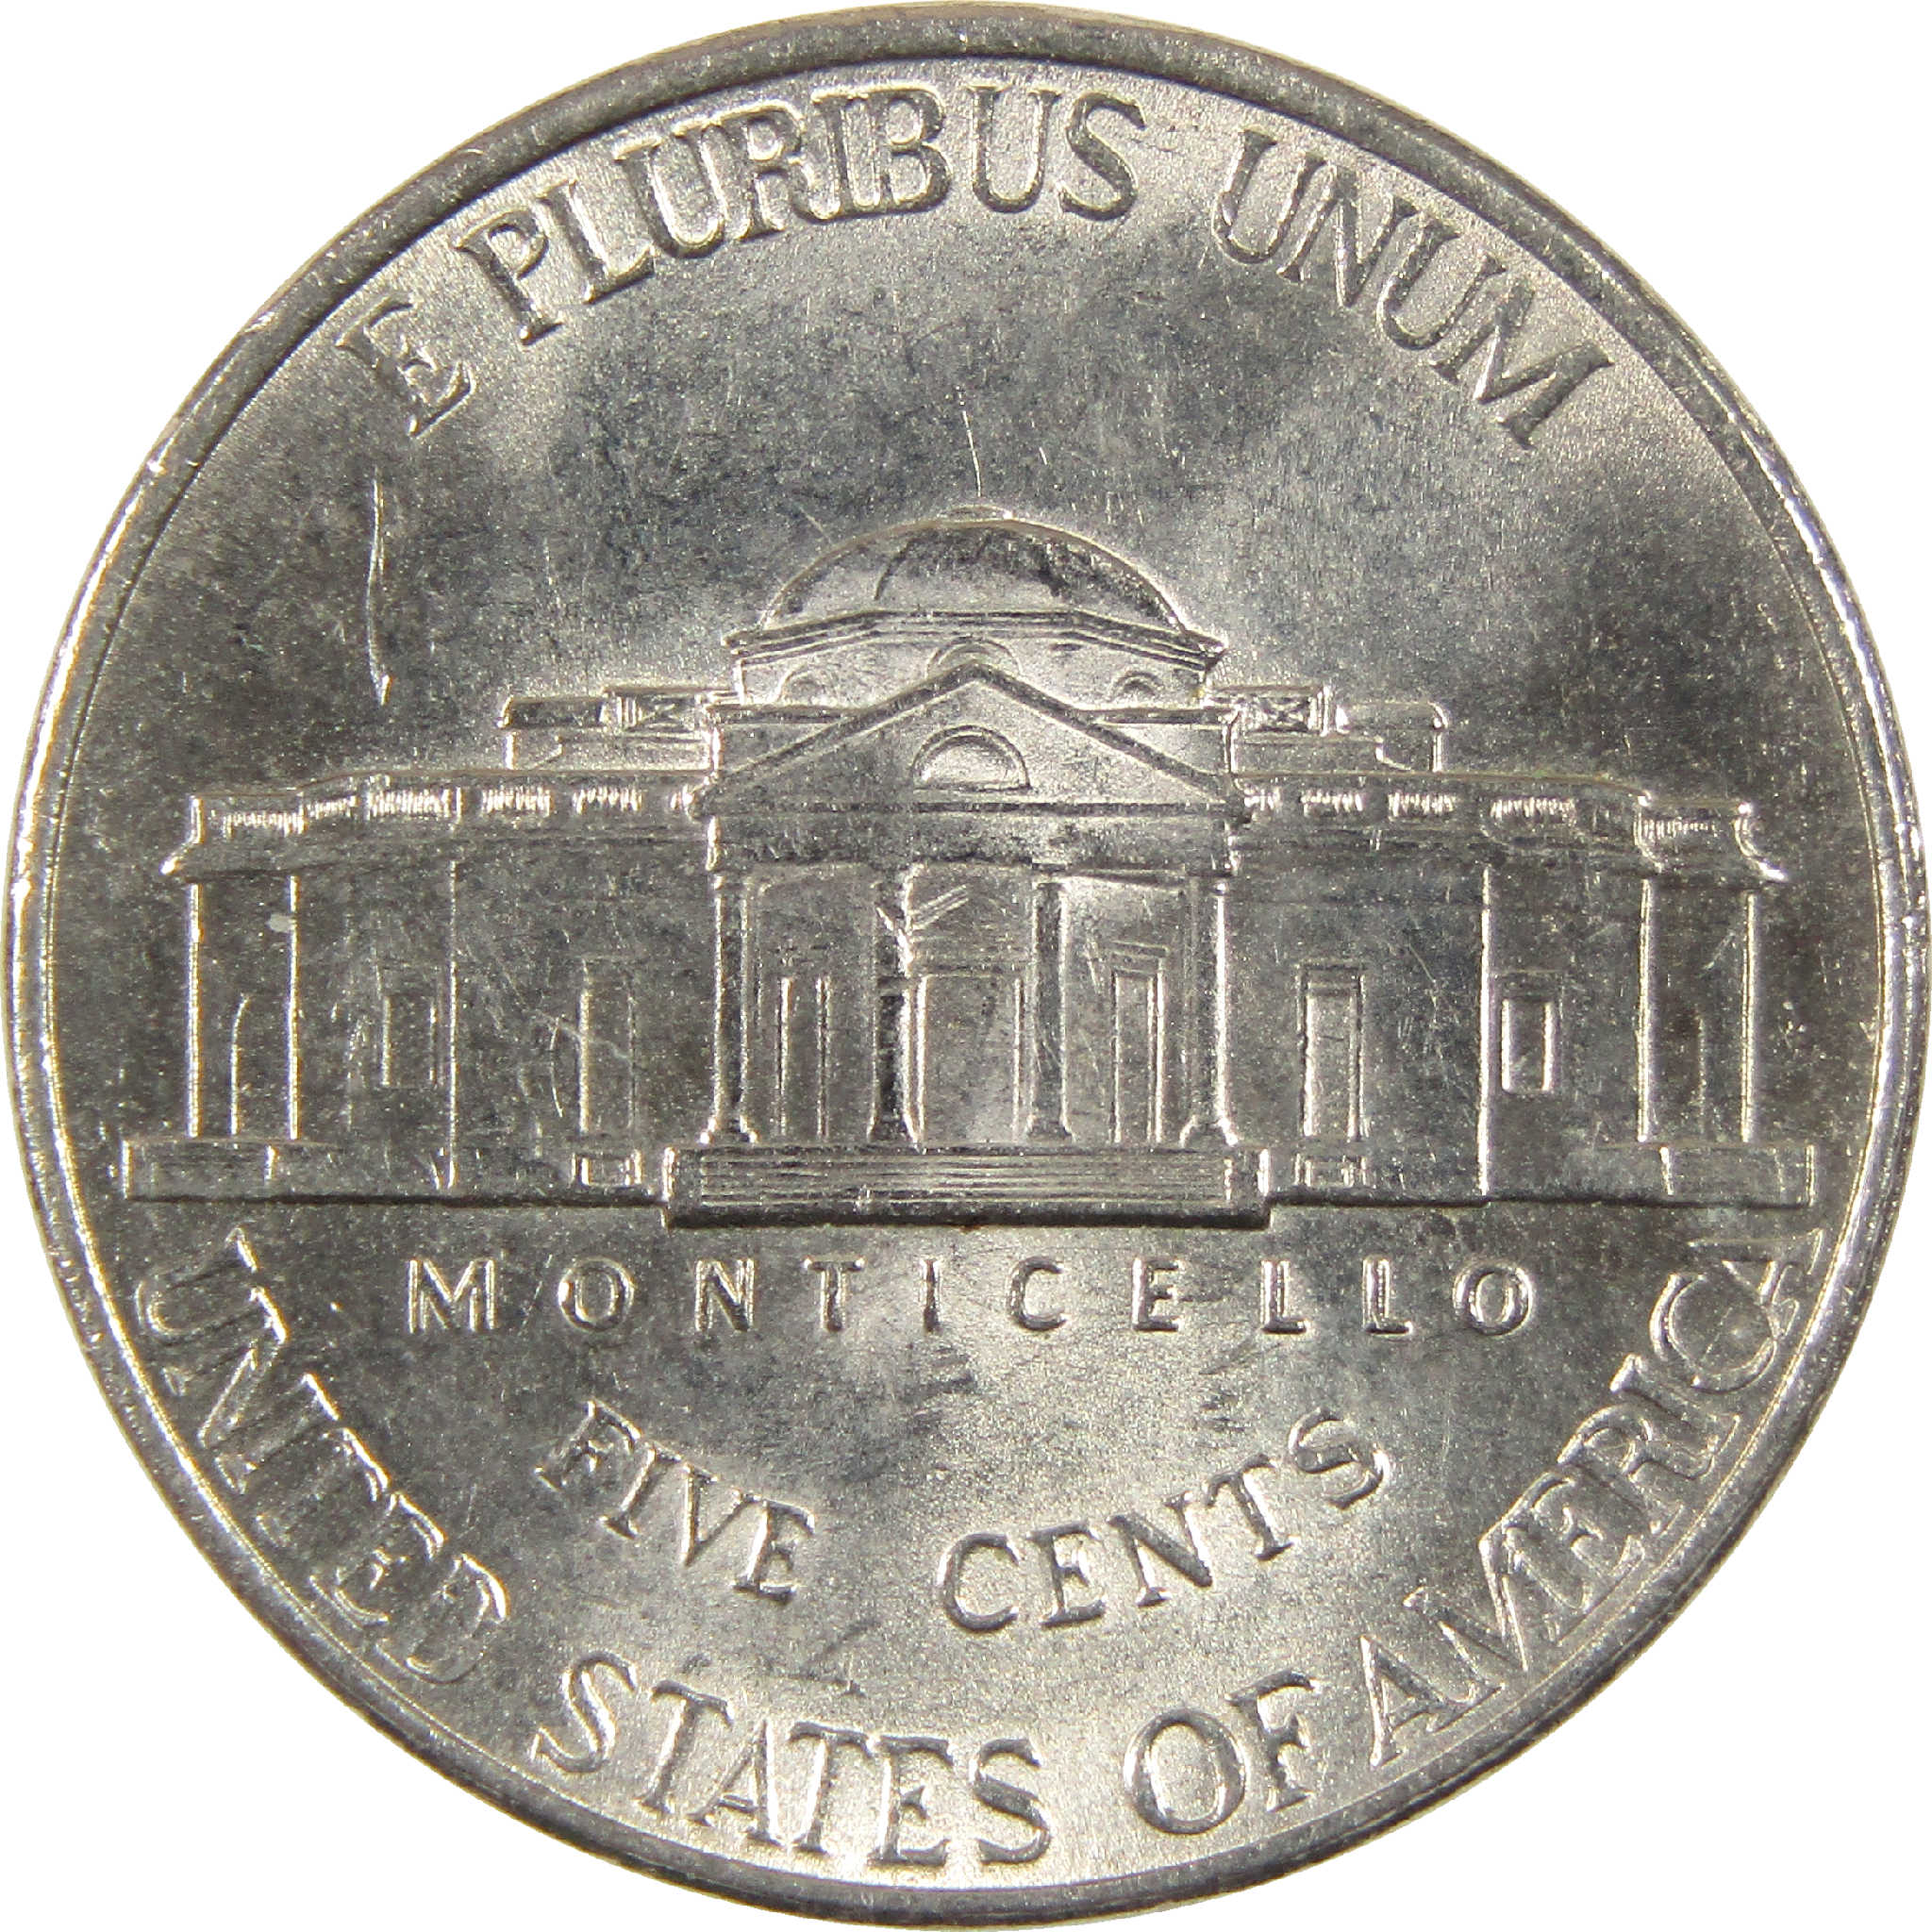 2000 P Jefferson Nickel Uncirculated 5c Coin